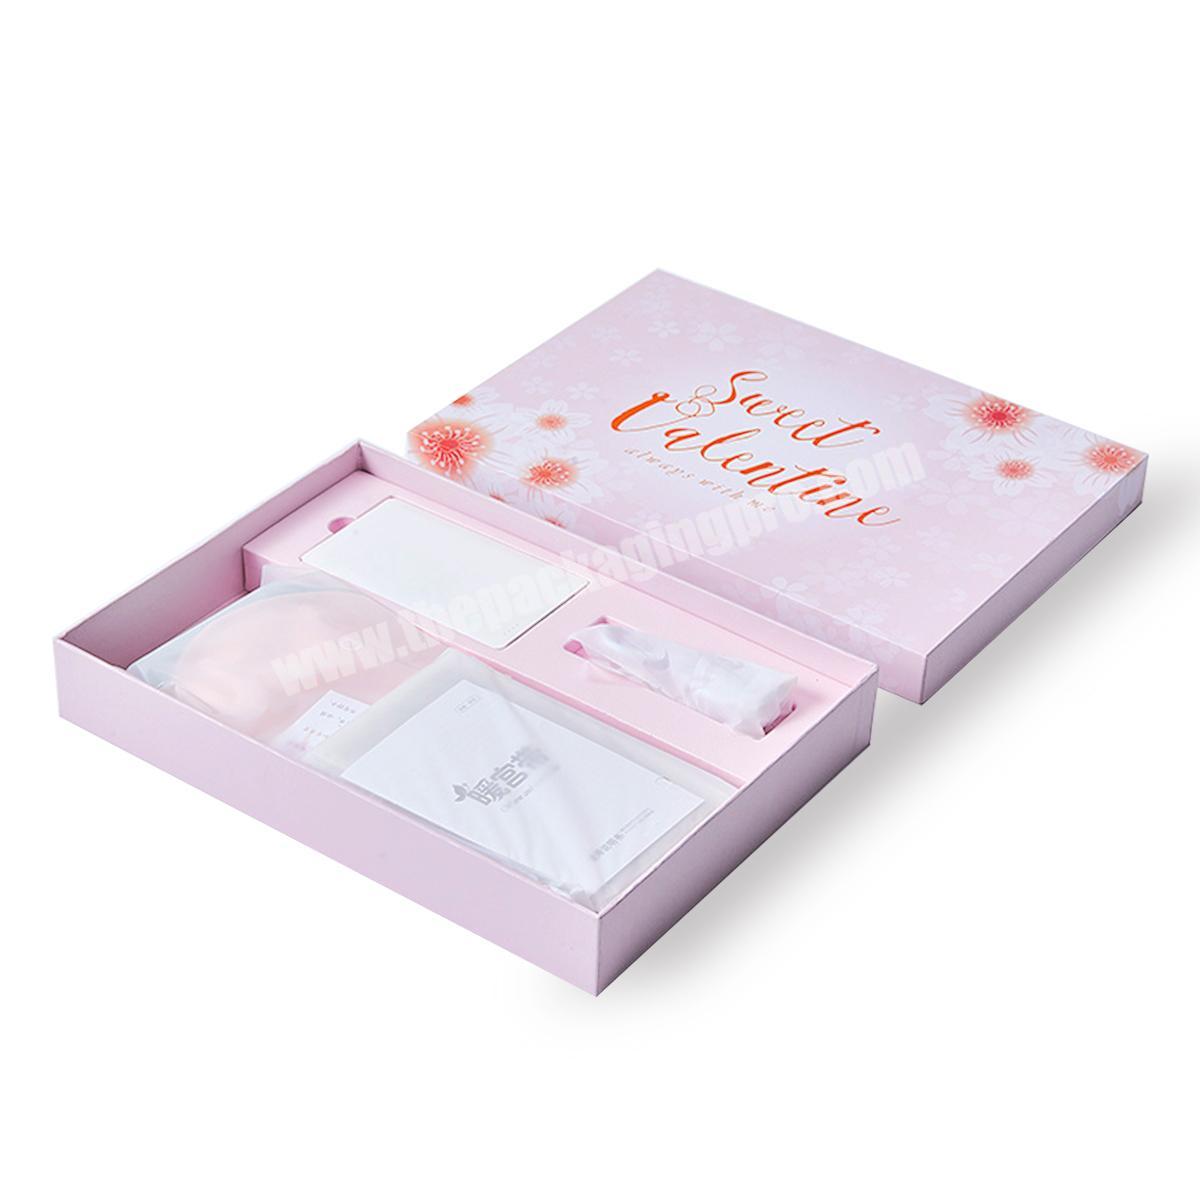 chocolate paper cartridge big custom boxes with logo packaging window clothes gift box packaging